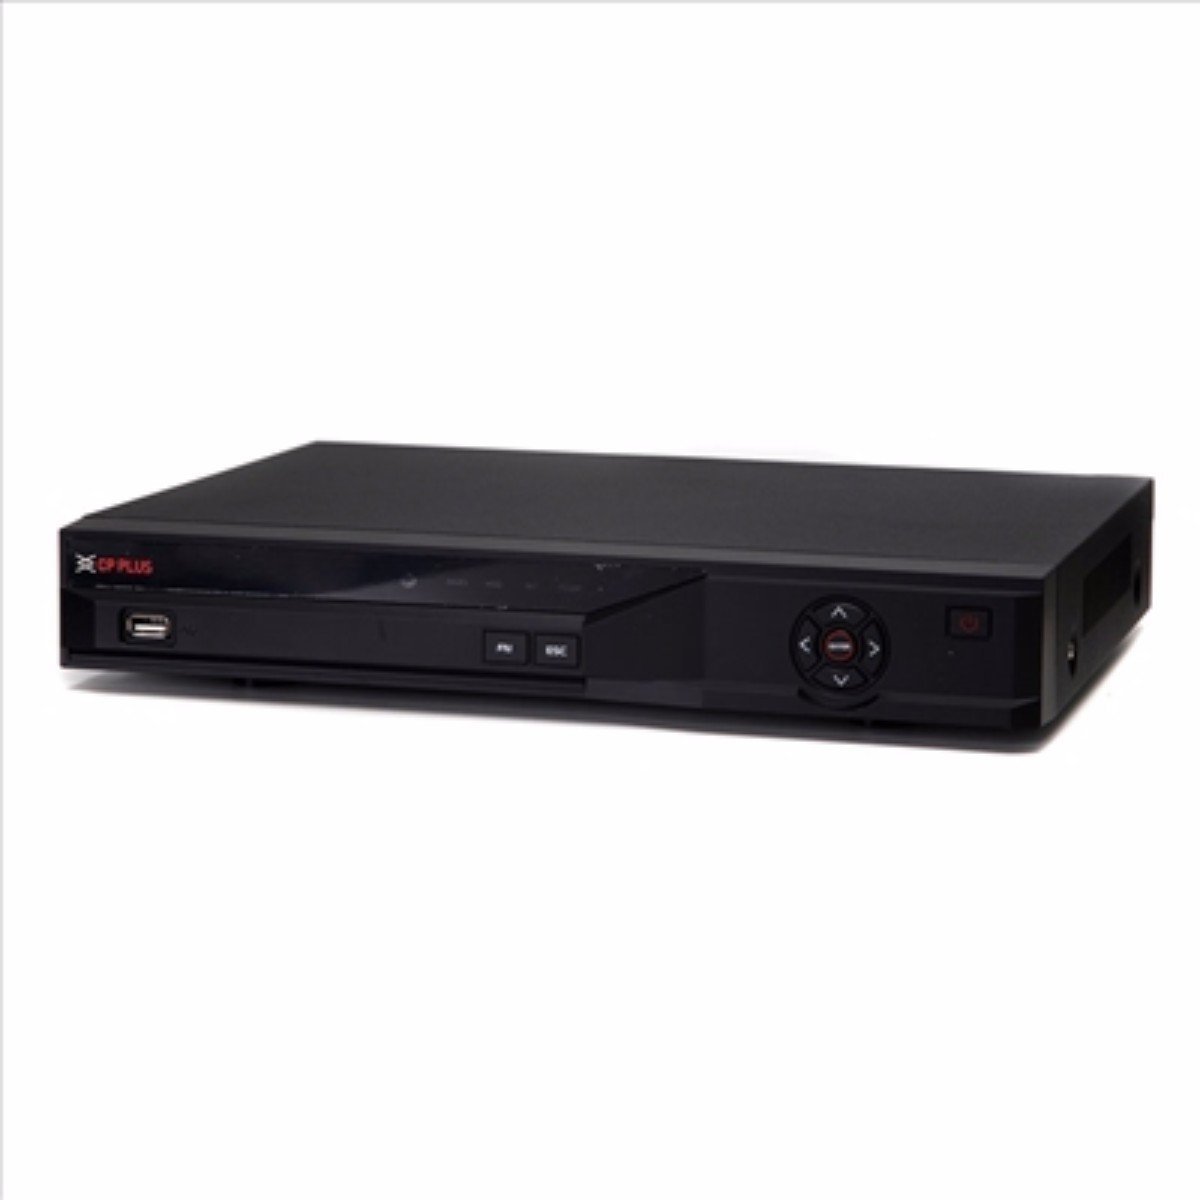 CP Plus CP-UVR-1616E1-S (without Harddisk) 16 Channel DVR (Black)